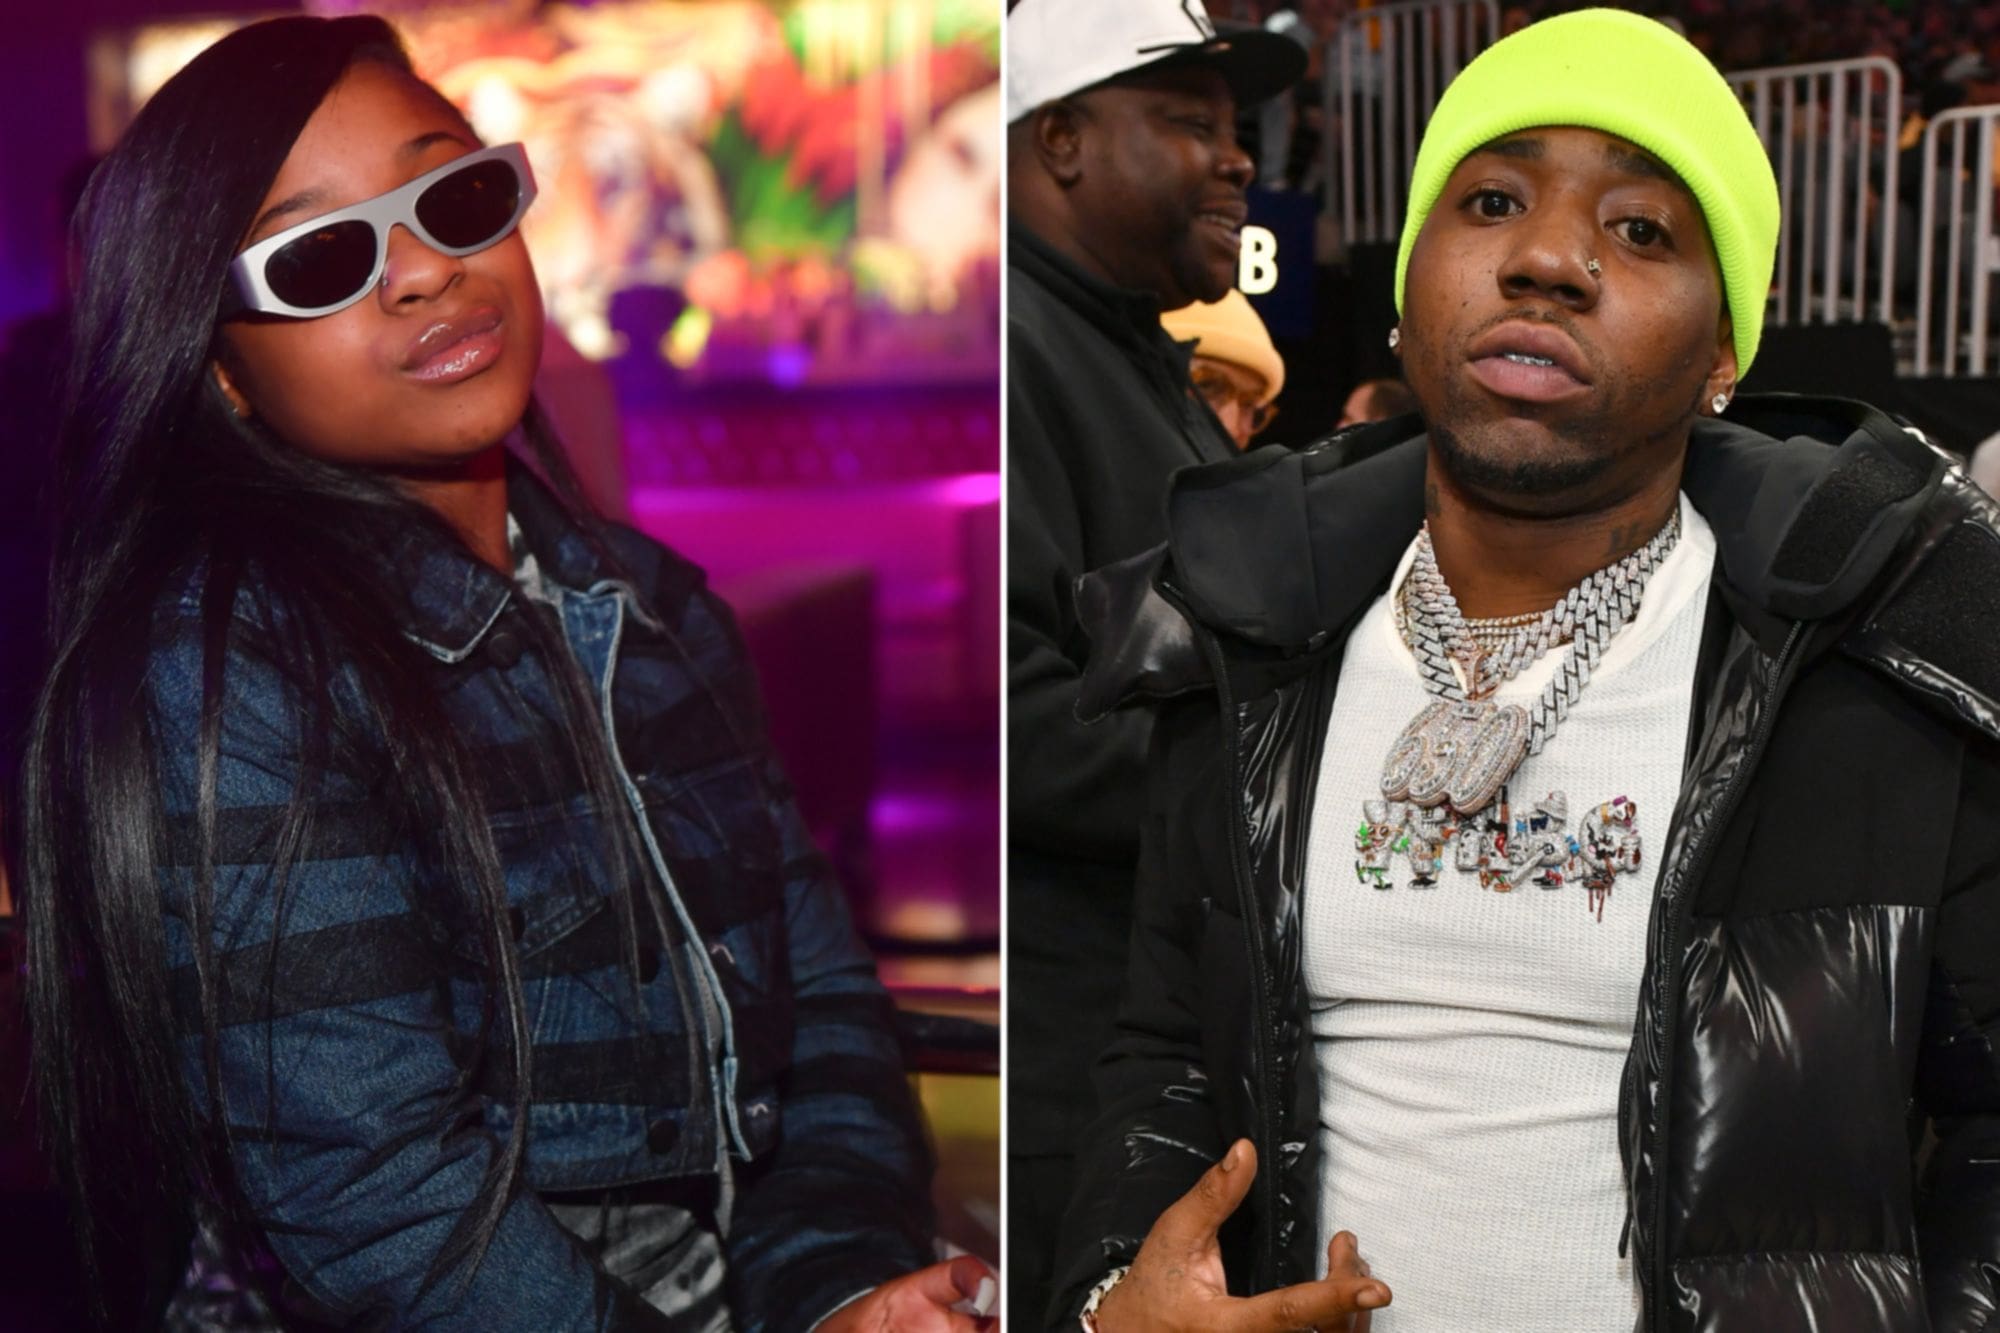 Reginae Carter Responds Following Accusations Involving Her Former BF ...